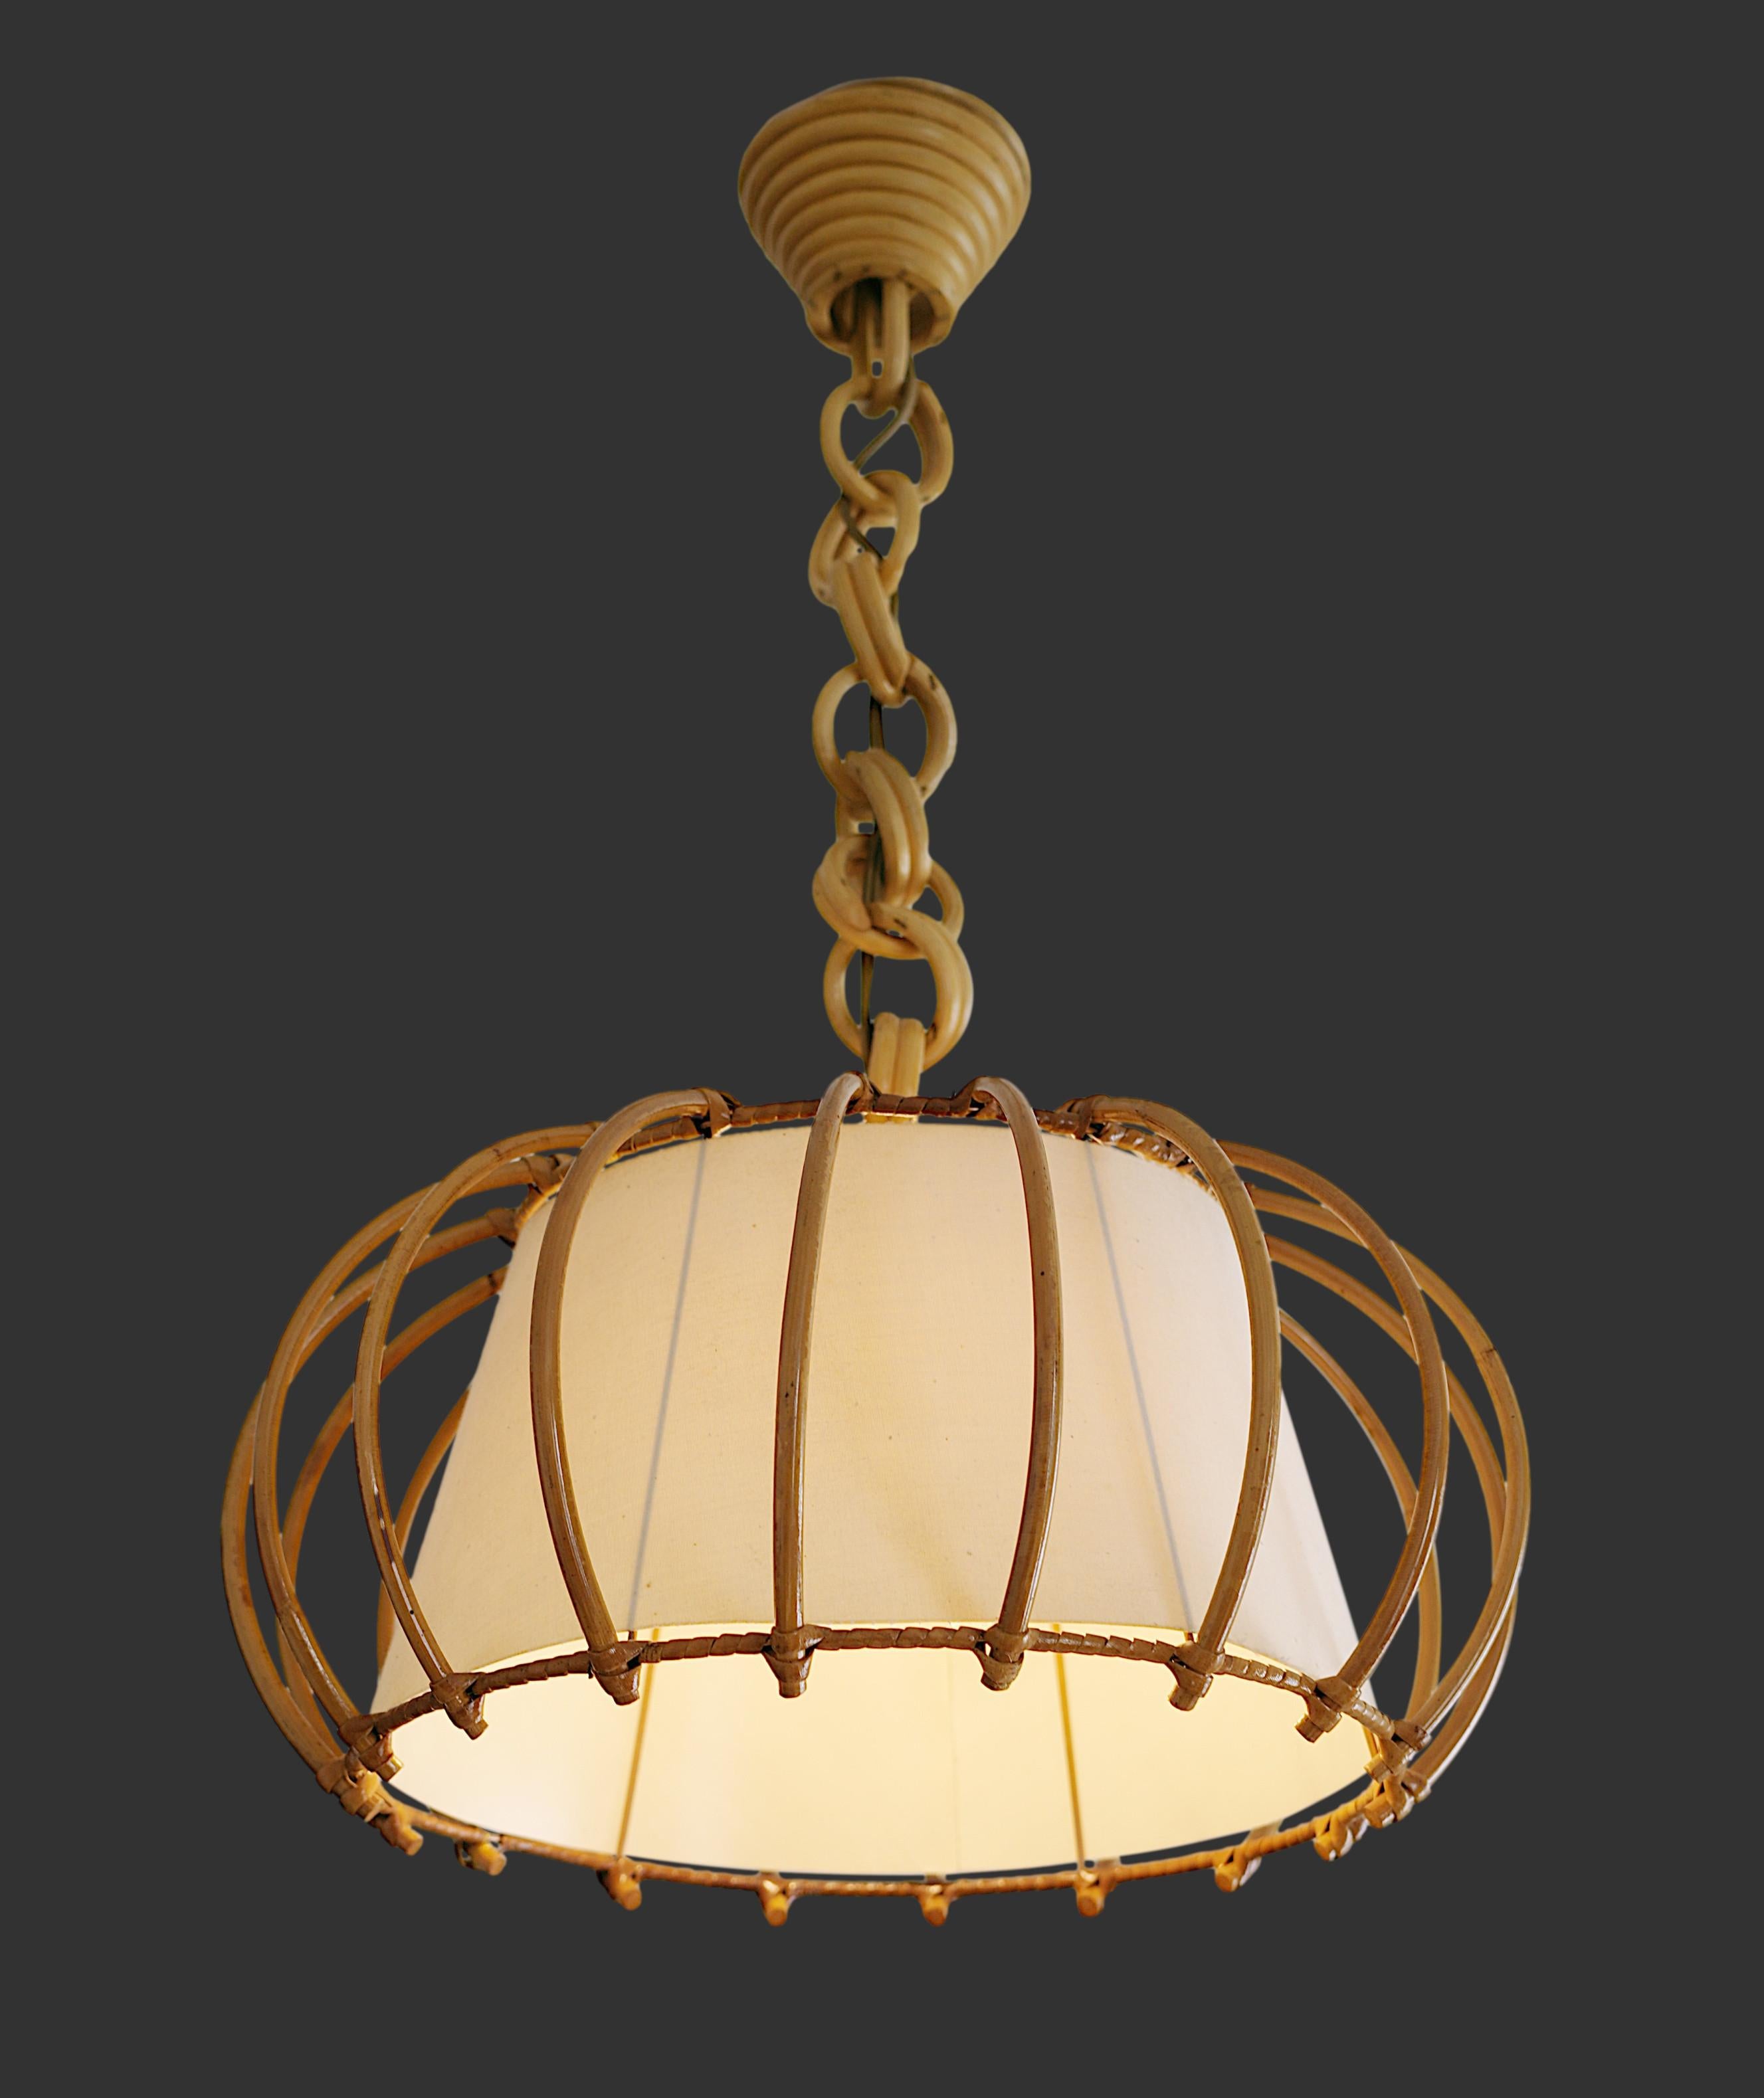 Bamboo pendant  chandelier by Louis SOGNOT, France, 1950s. Bamboo, rattan and fabric. Original shade. Height: 20.5